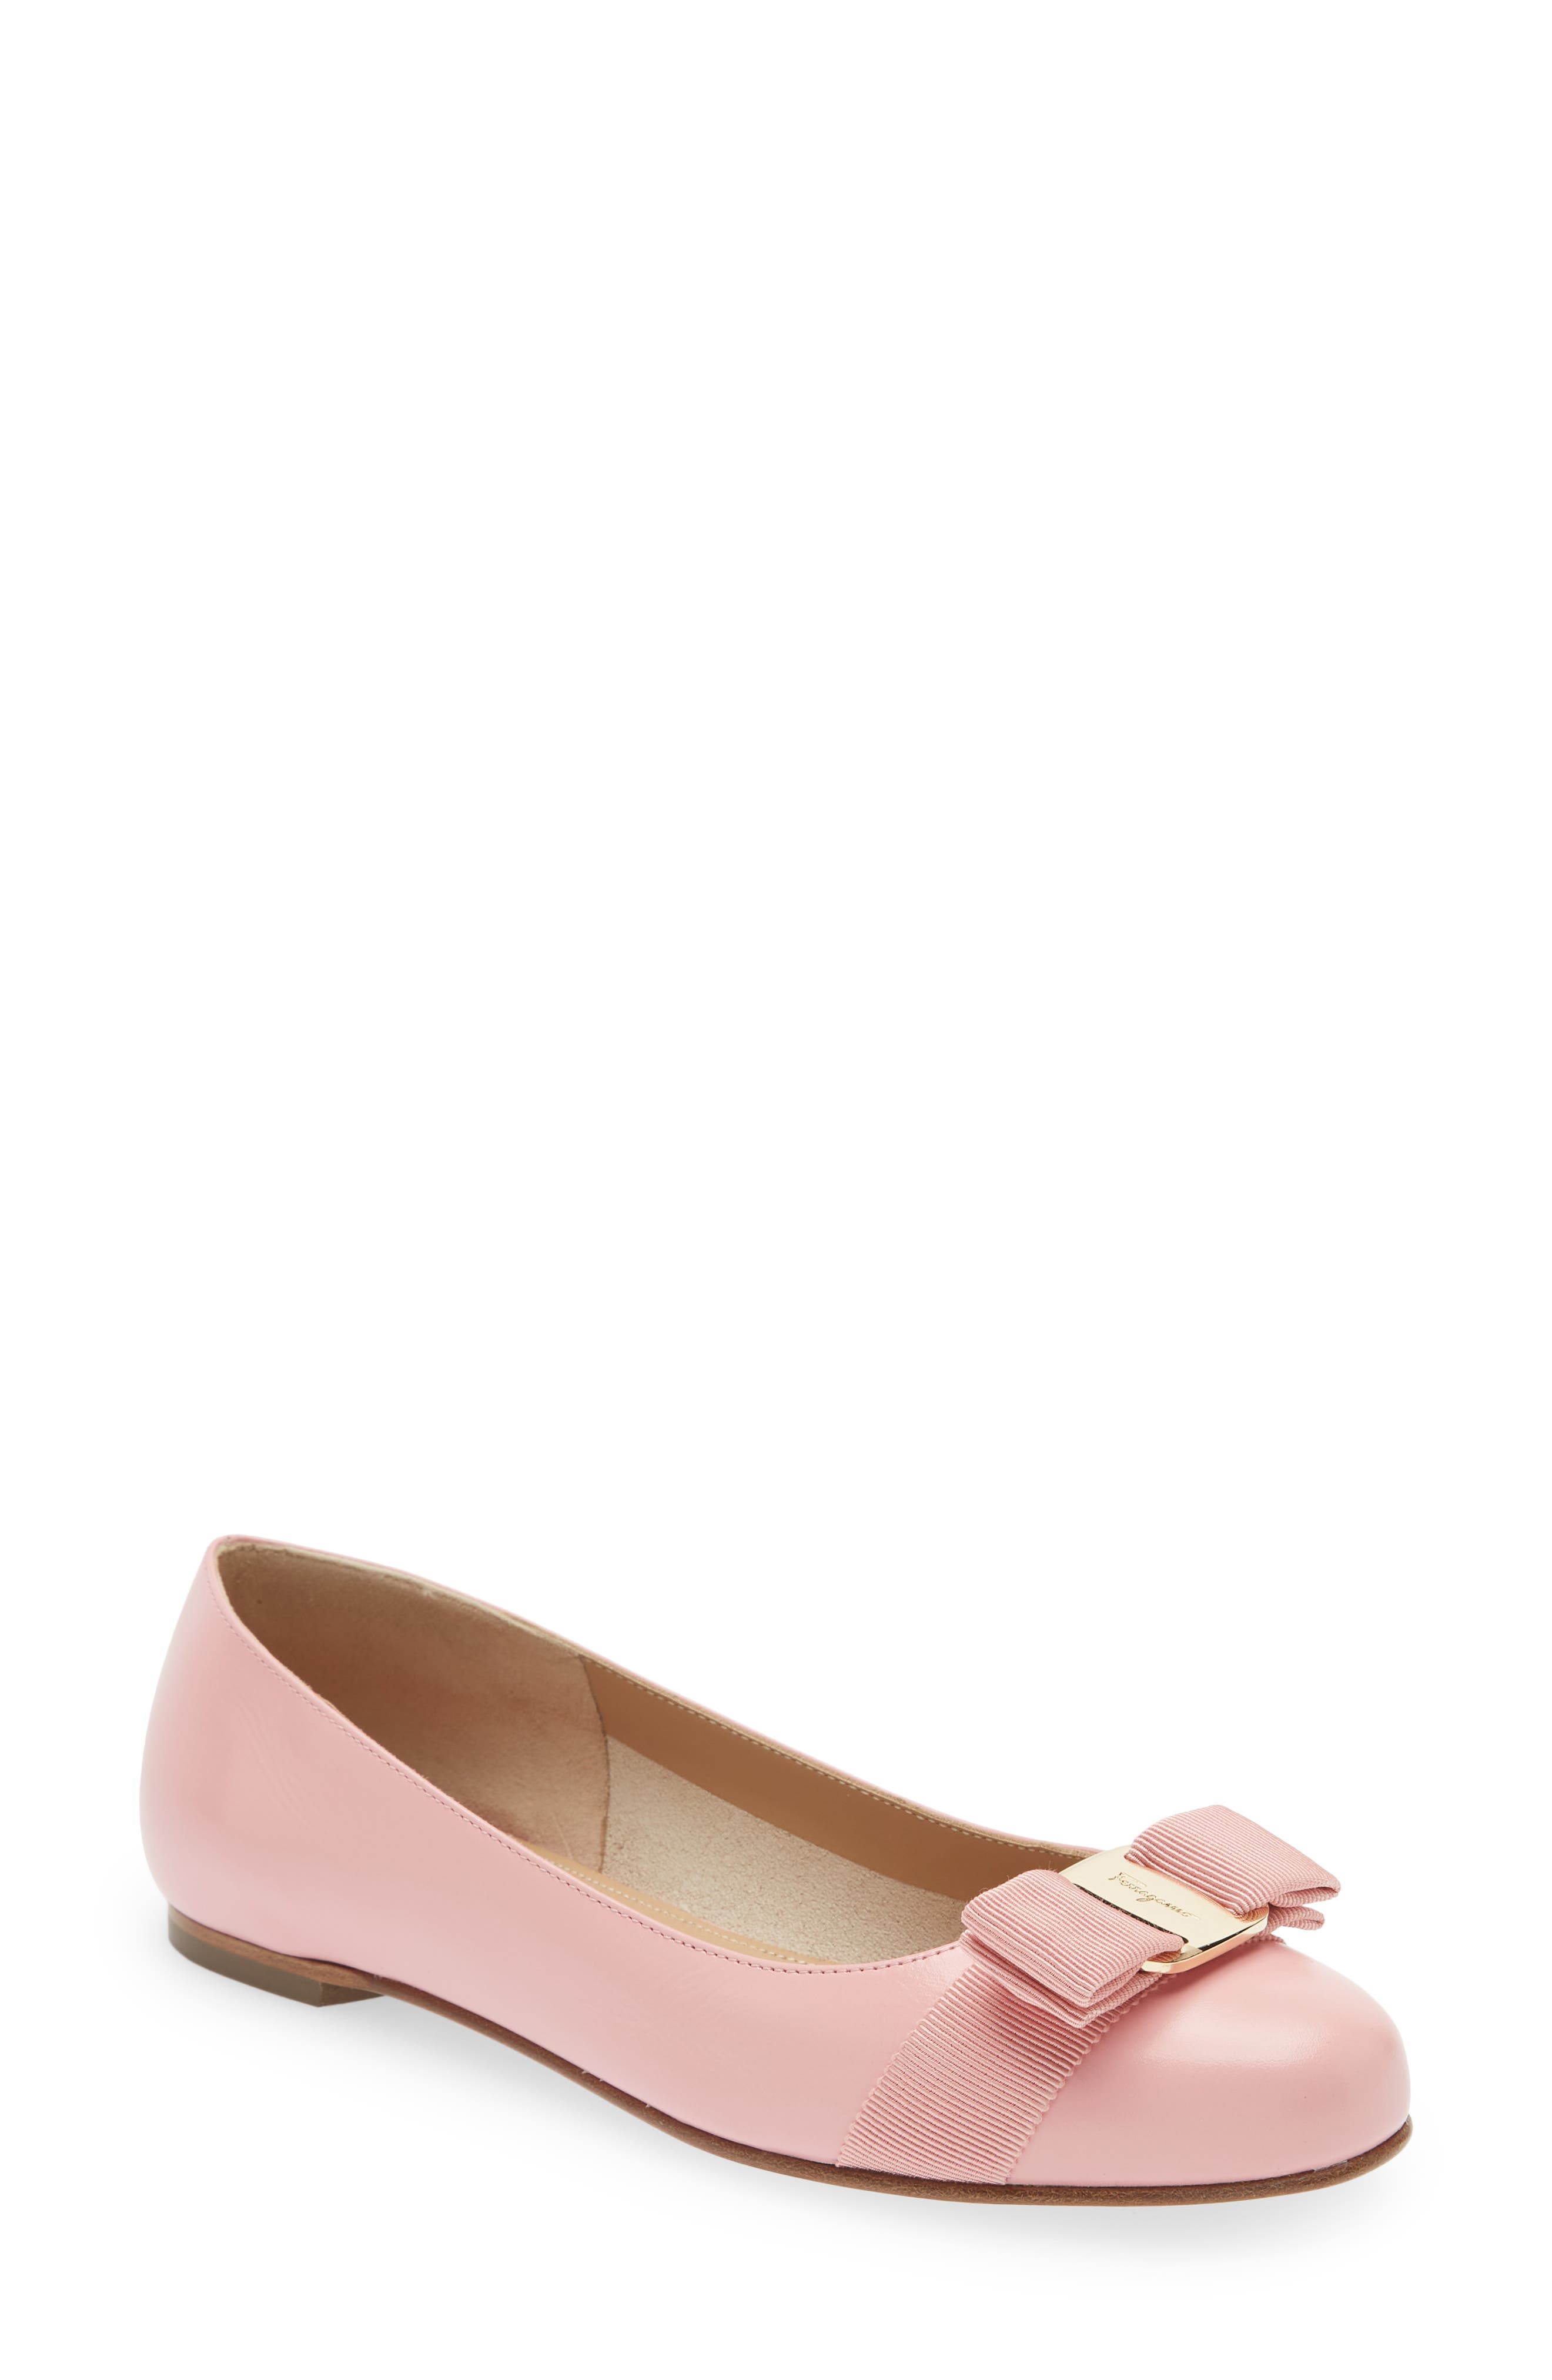 Salvatore Ferragamo Varina Bow Flat in Pink at Nordstrom, Size 9.5